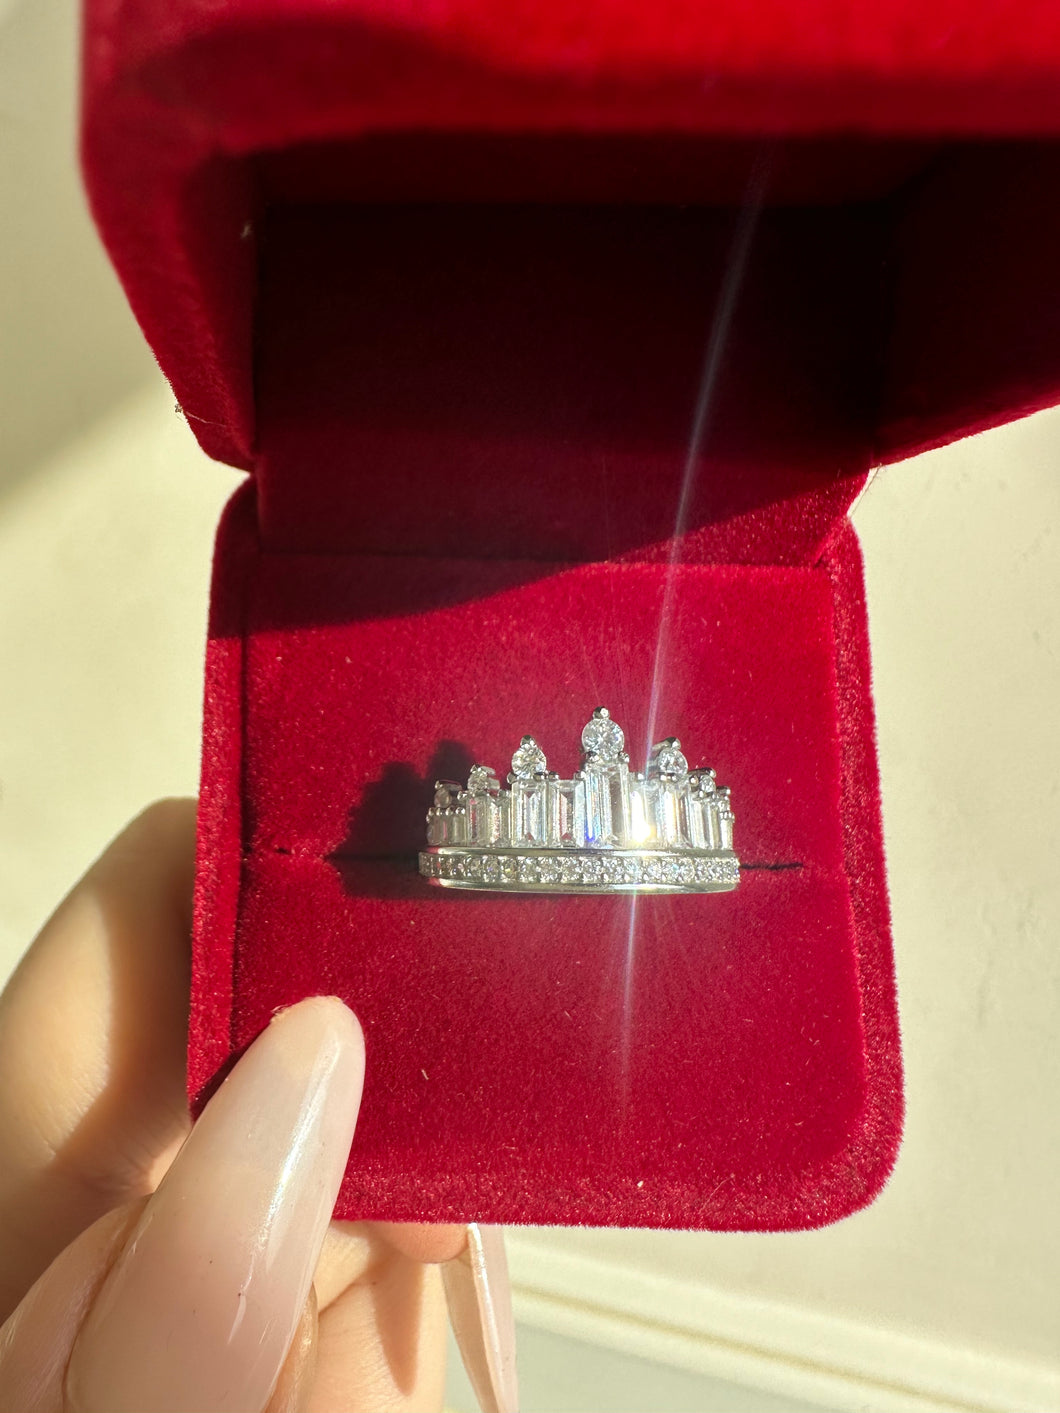 The Crown Ring